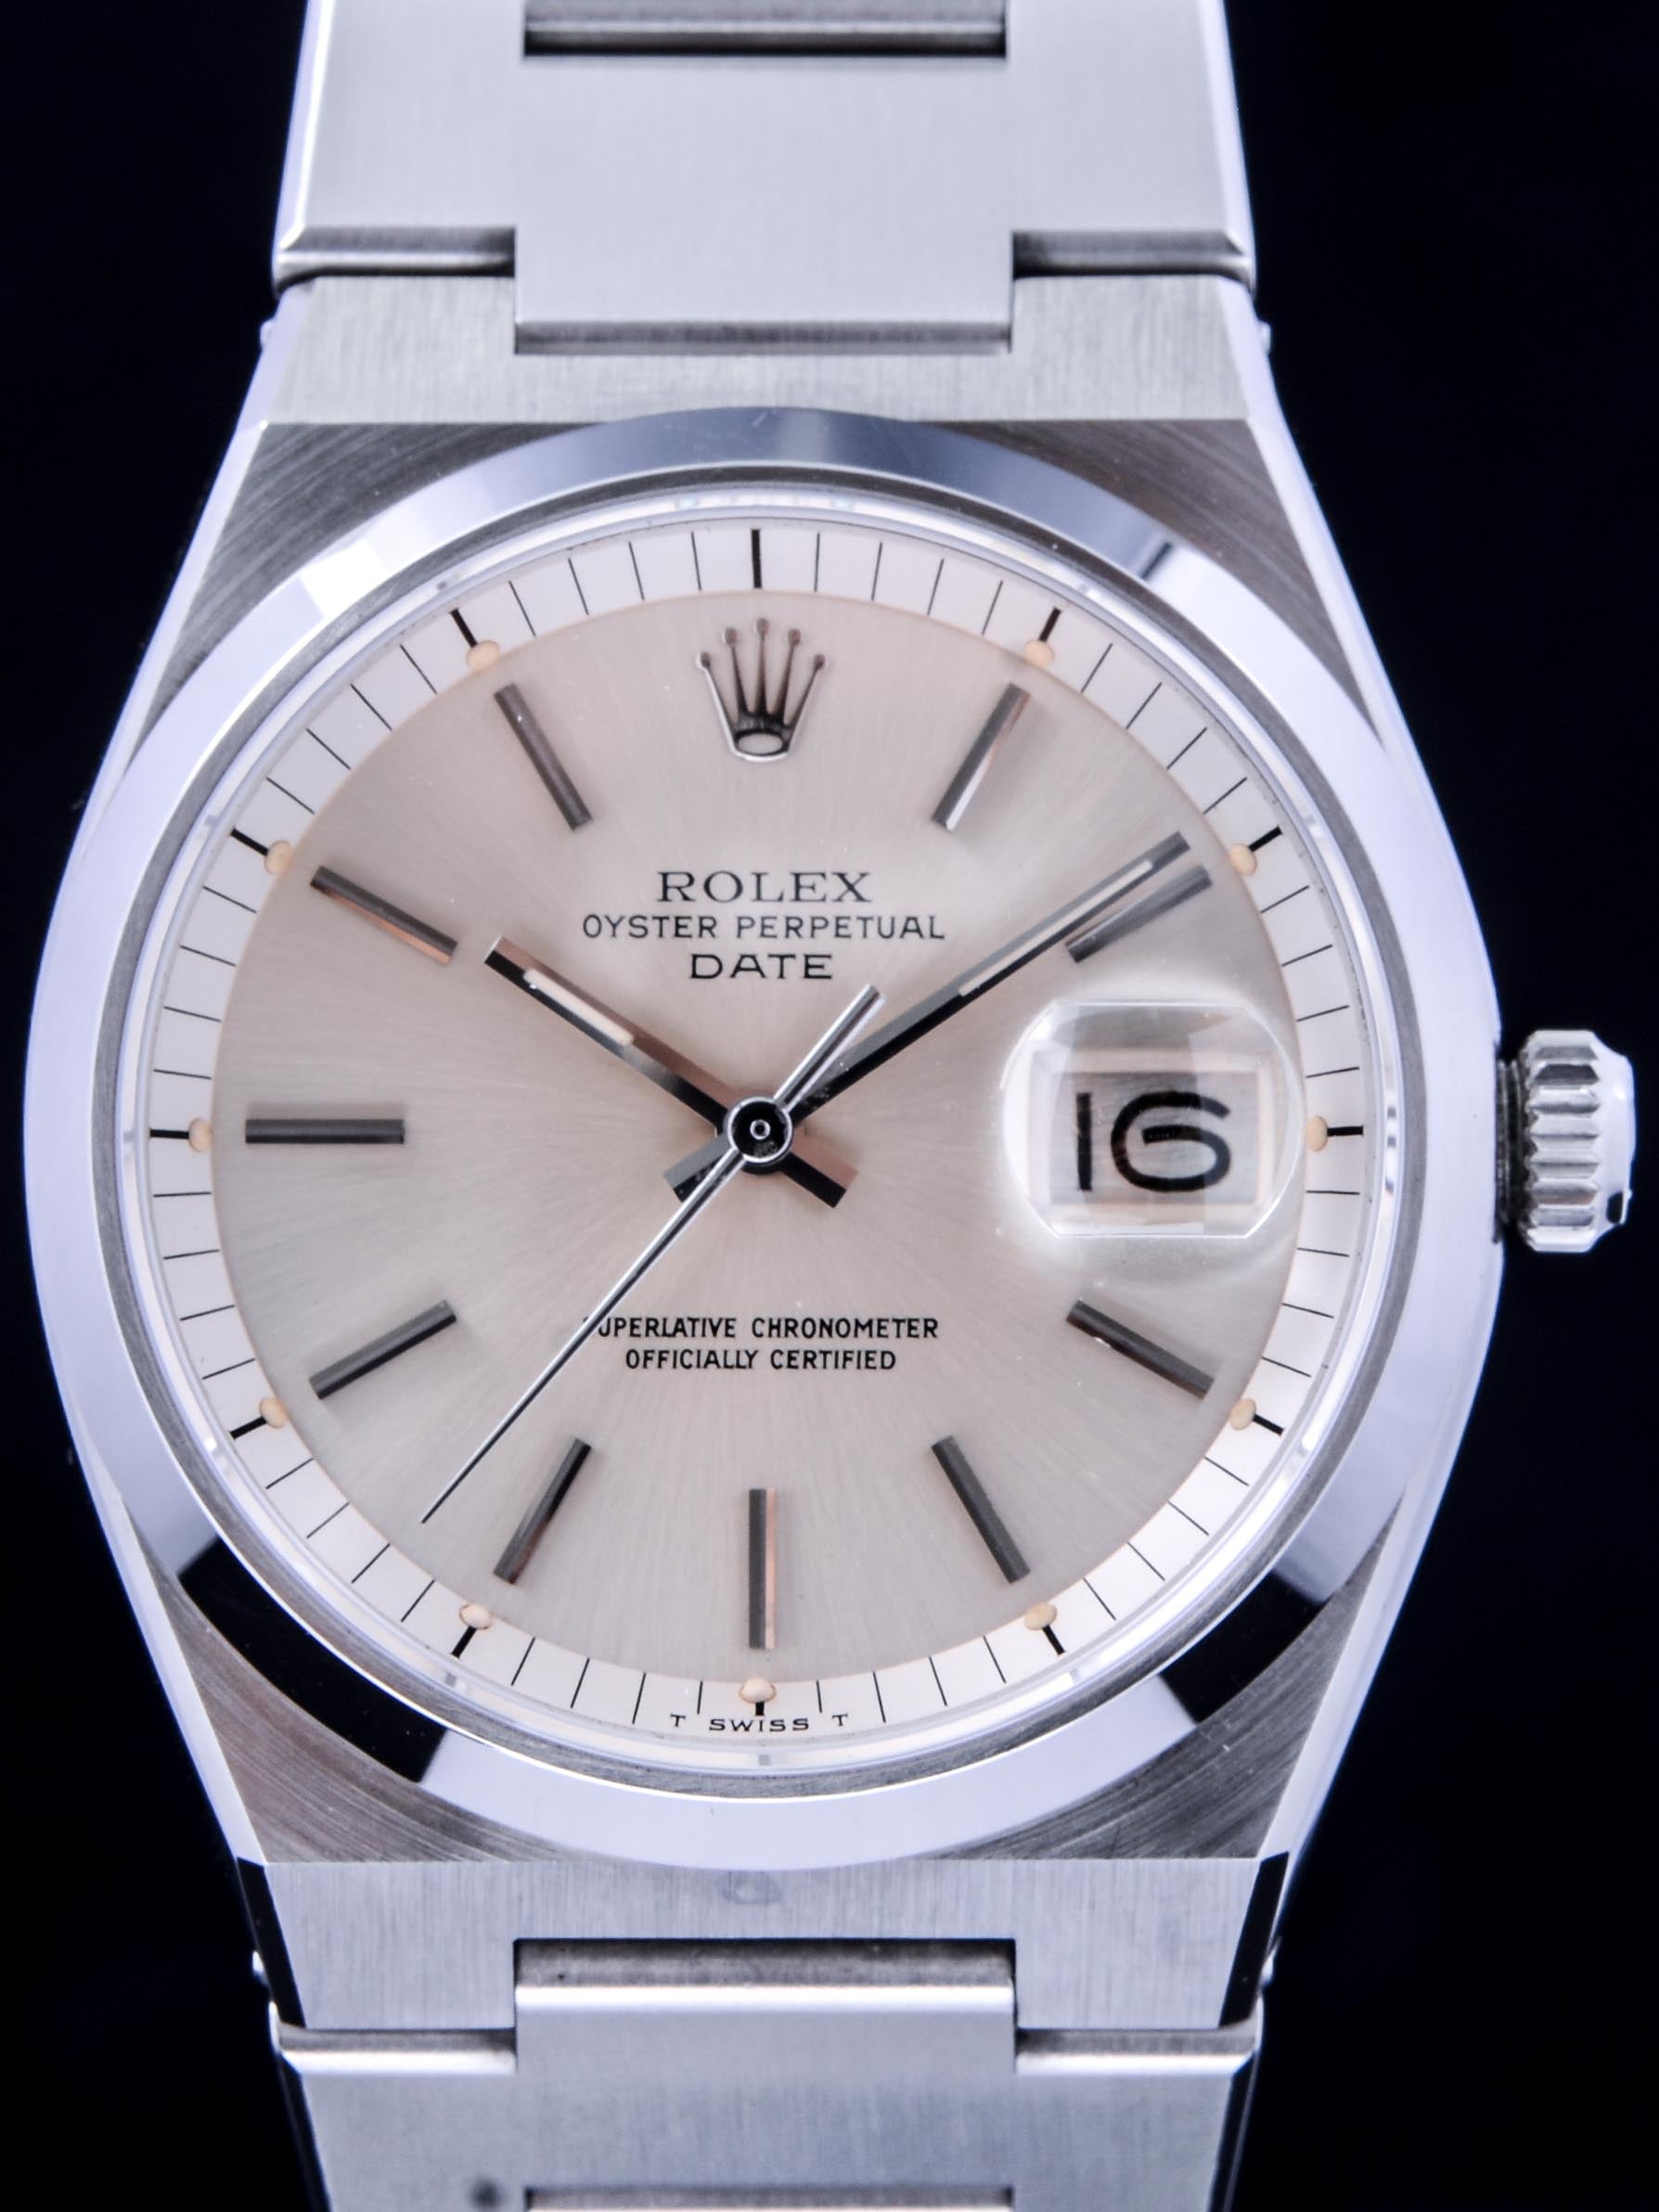 1978 Rolex Oyster Perpetual Date (Ref. 1530) "Unpolished"